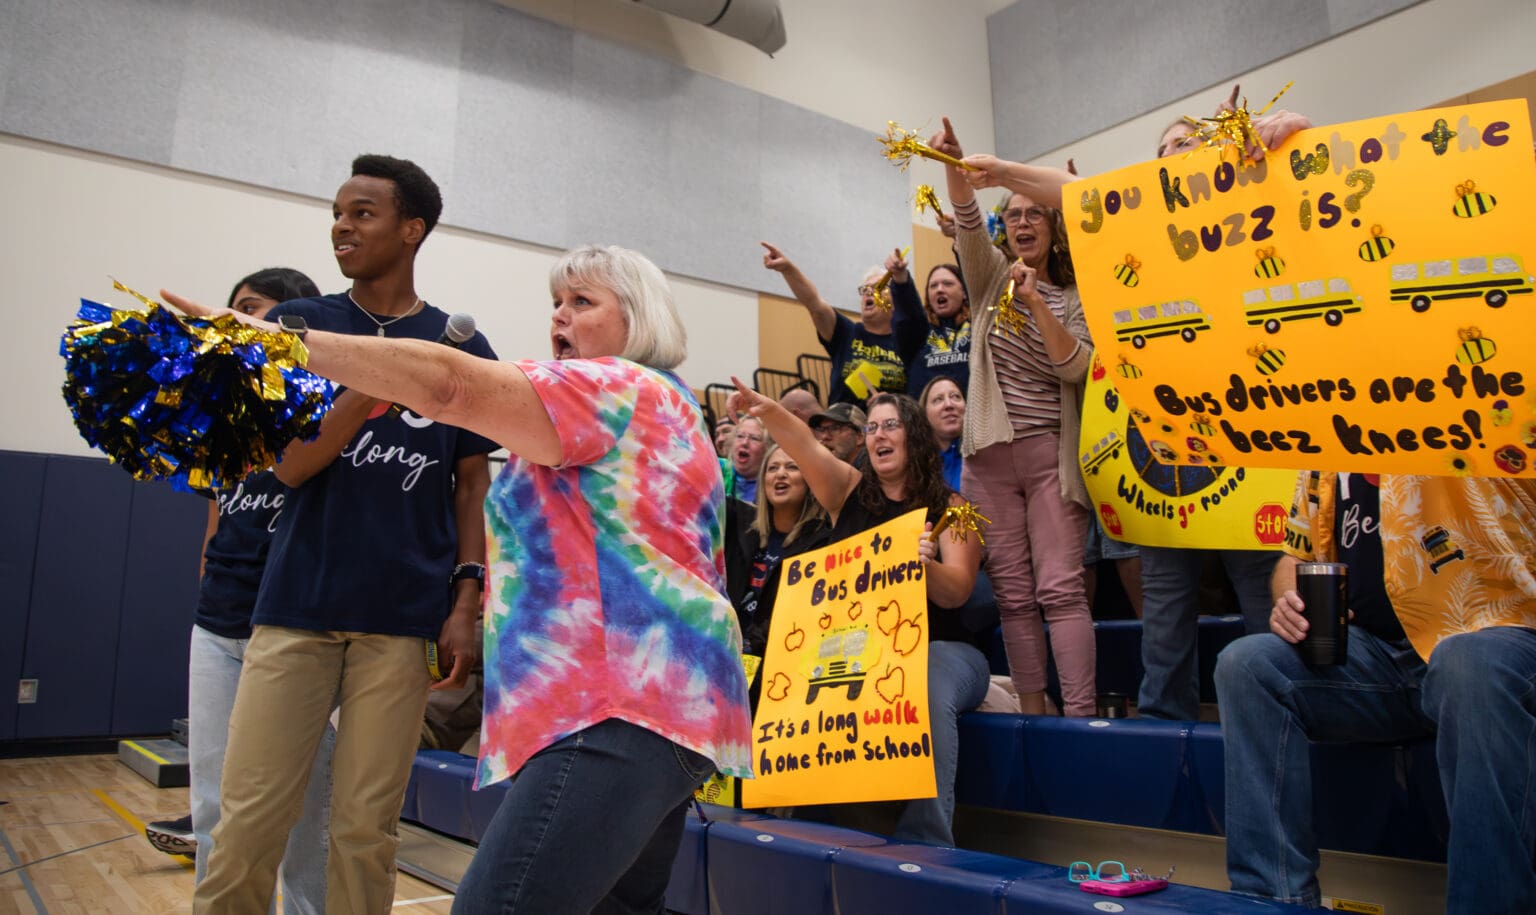 Ferndale Student School Board member Kwabena Ledbetter holds the microphone for bus driver Carla DeSoto as she cheers at the Ferndale School District staff rally at the high school on Tuesday